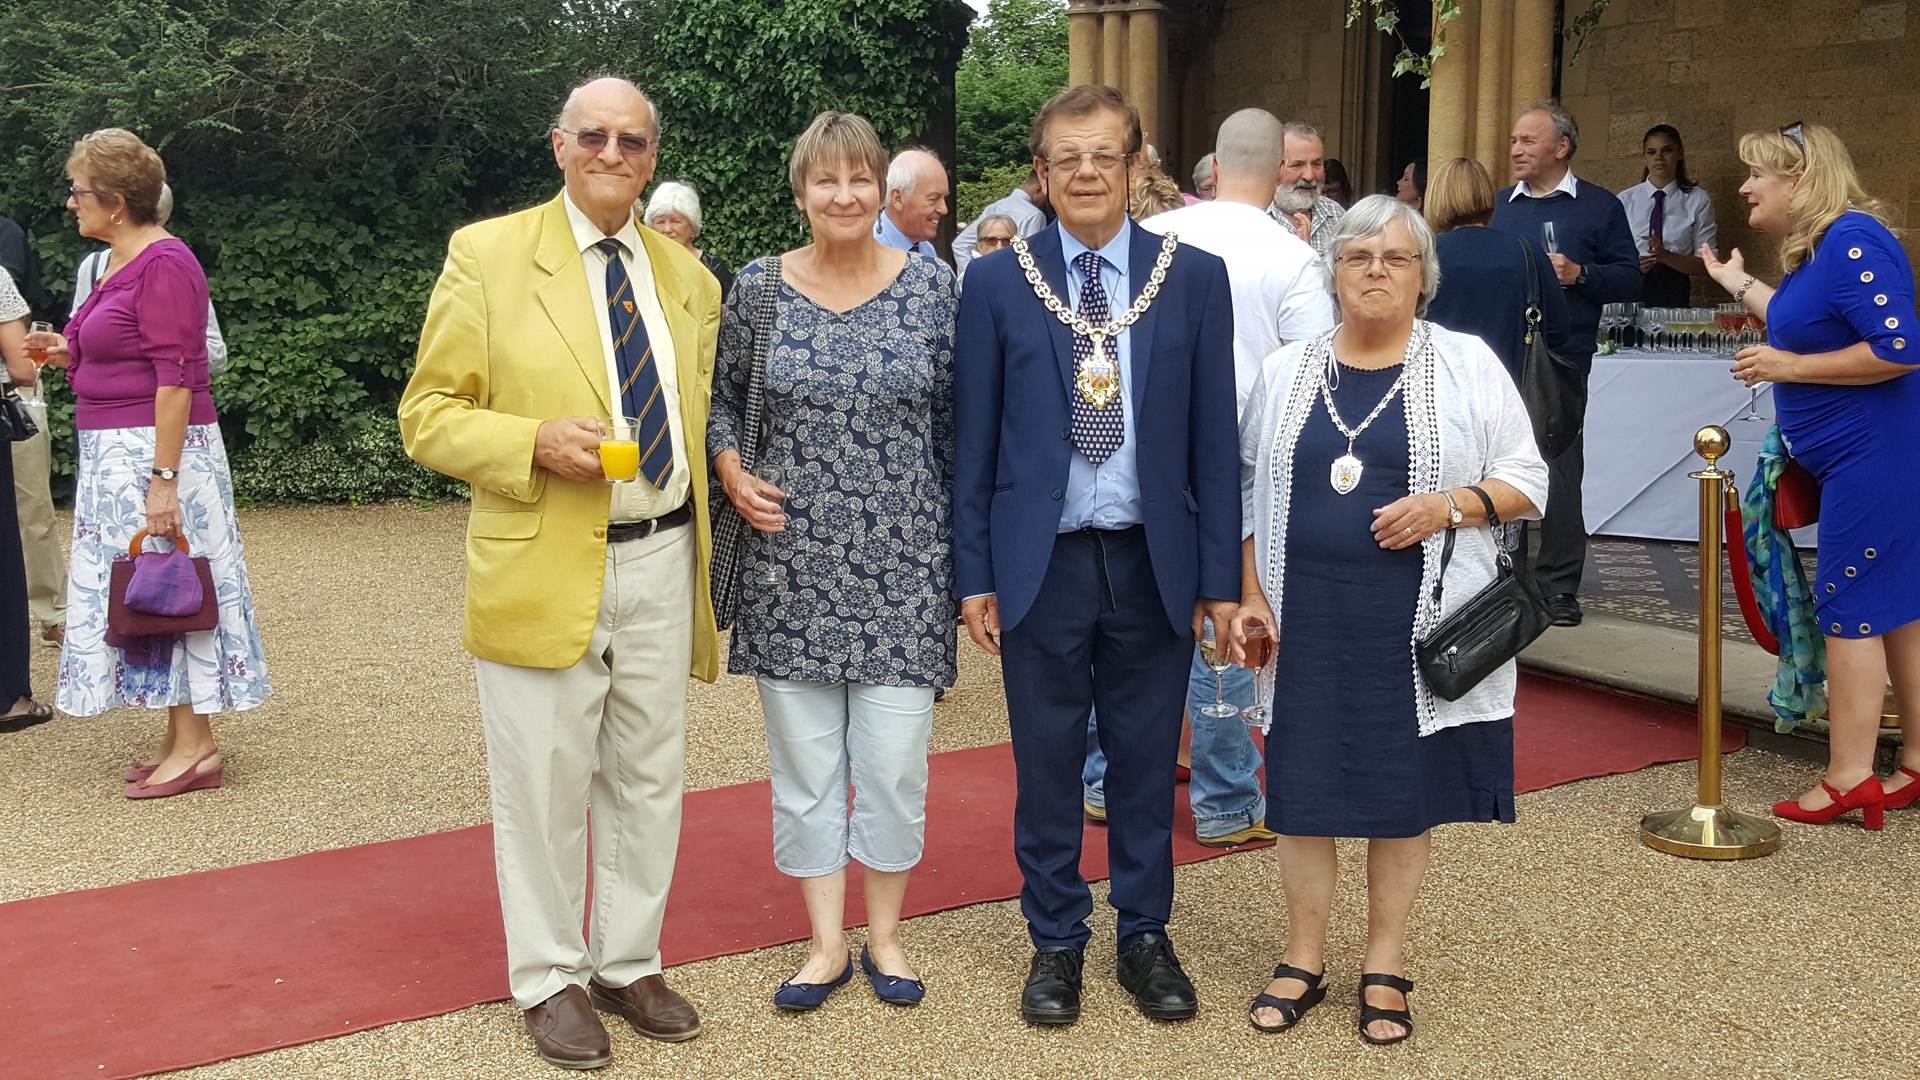 left to right Peter Worsley and Sarah Bamford, Vice Chairman and Chair, Mayor Roger Whyborn and Carole Whyborn